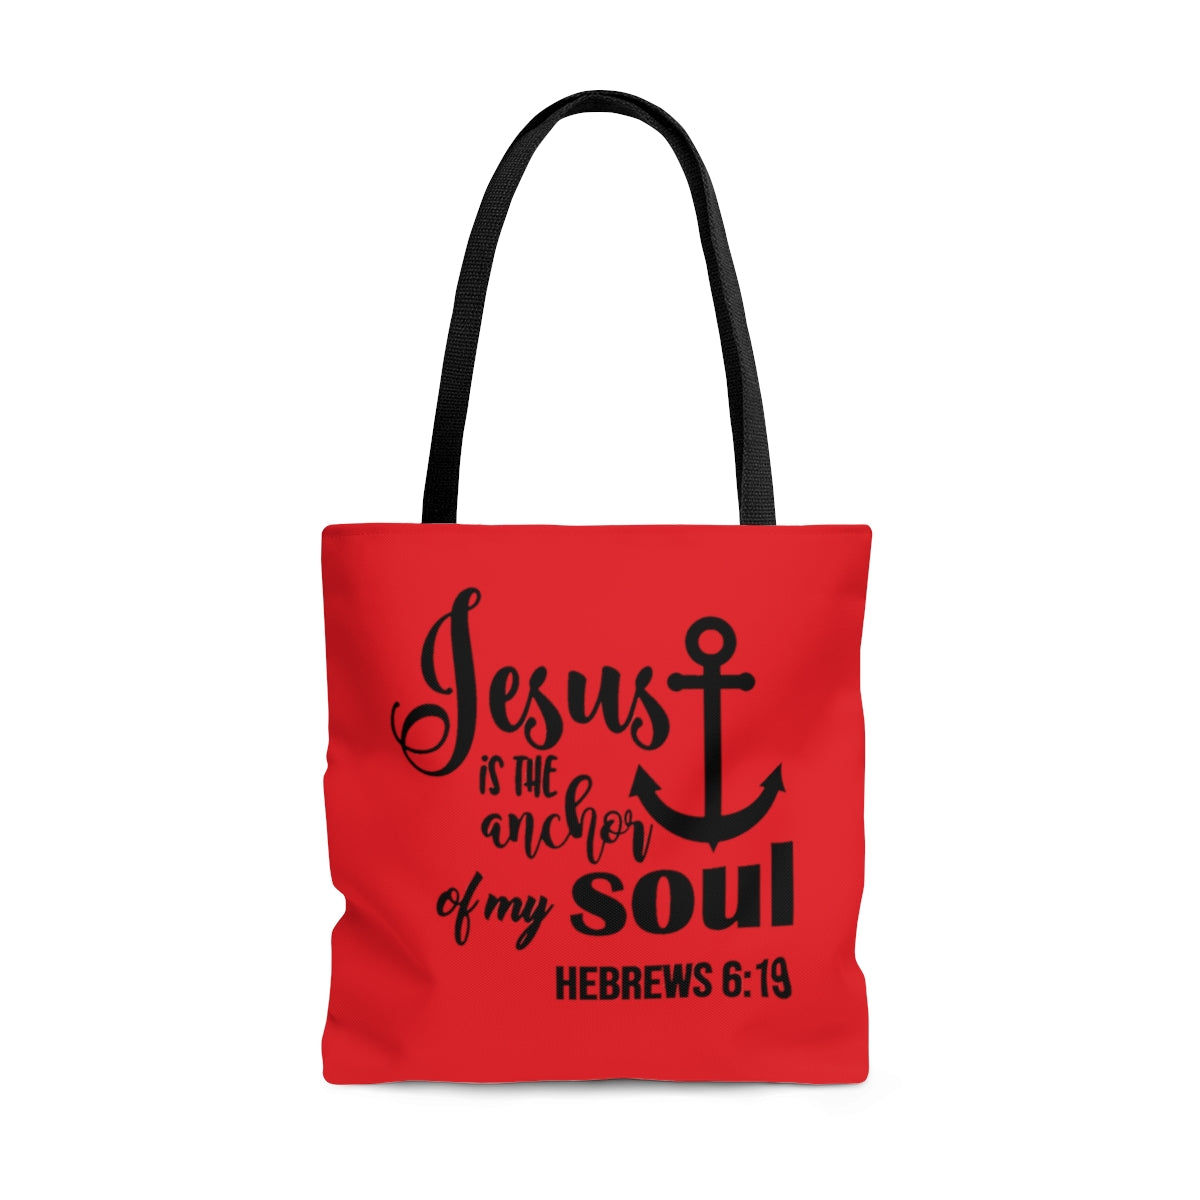 Jesus-Is-The-Anchor-Of-My-Soul-Hebrews-6:19-Tote-bag-(red)